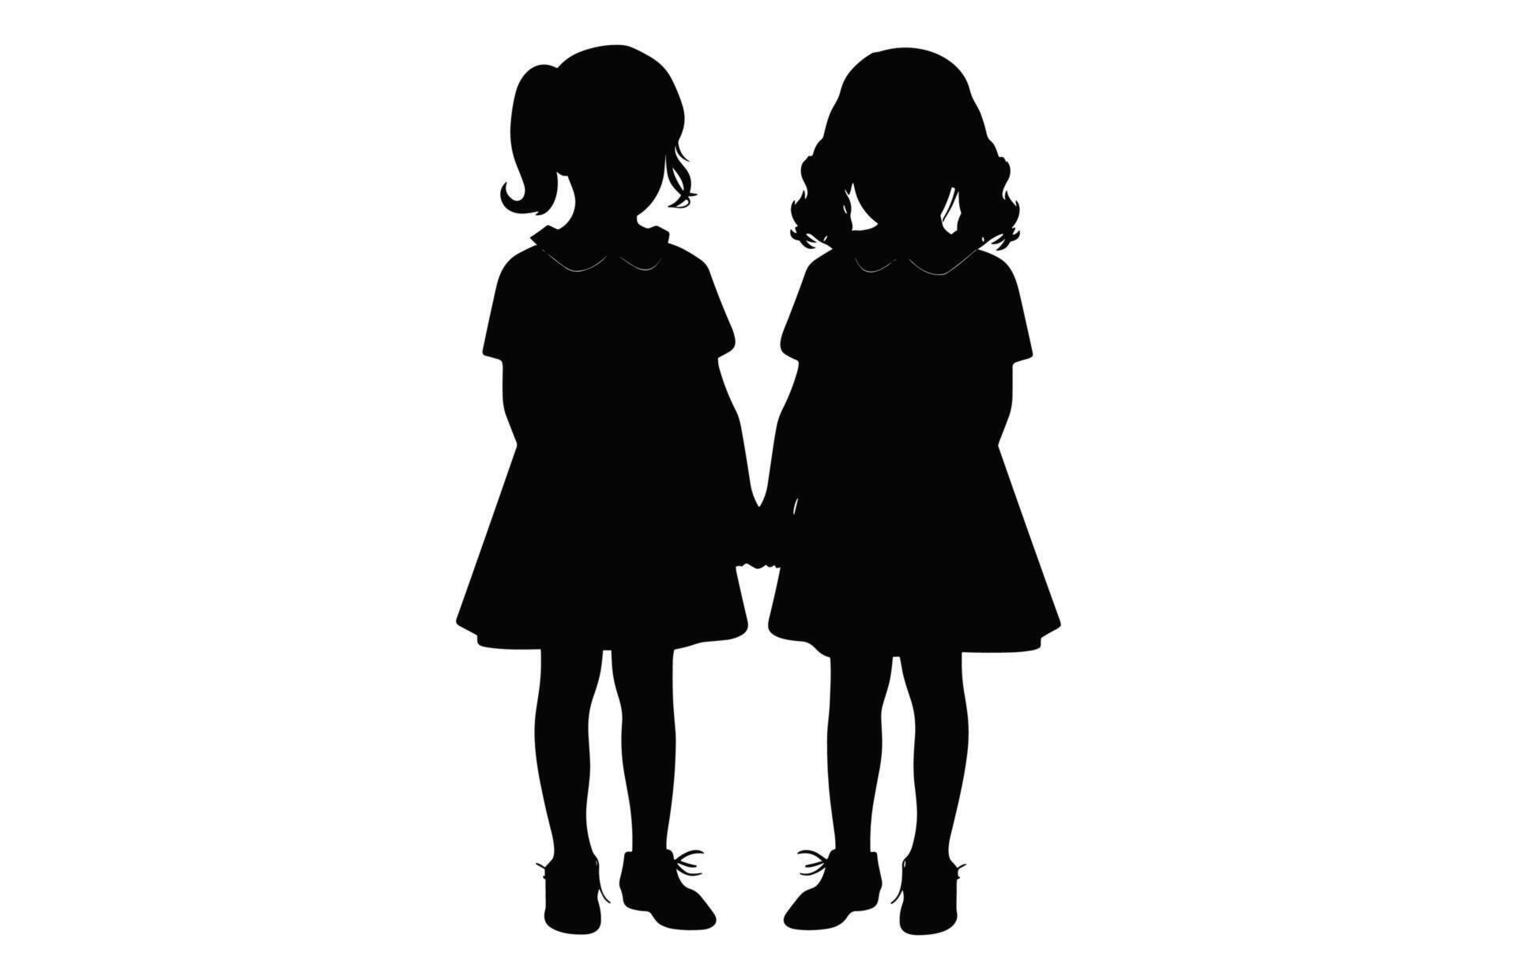 Twins girls silhouette isolated on a white background, Cute Twin Sister Silhouette black vector